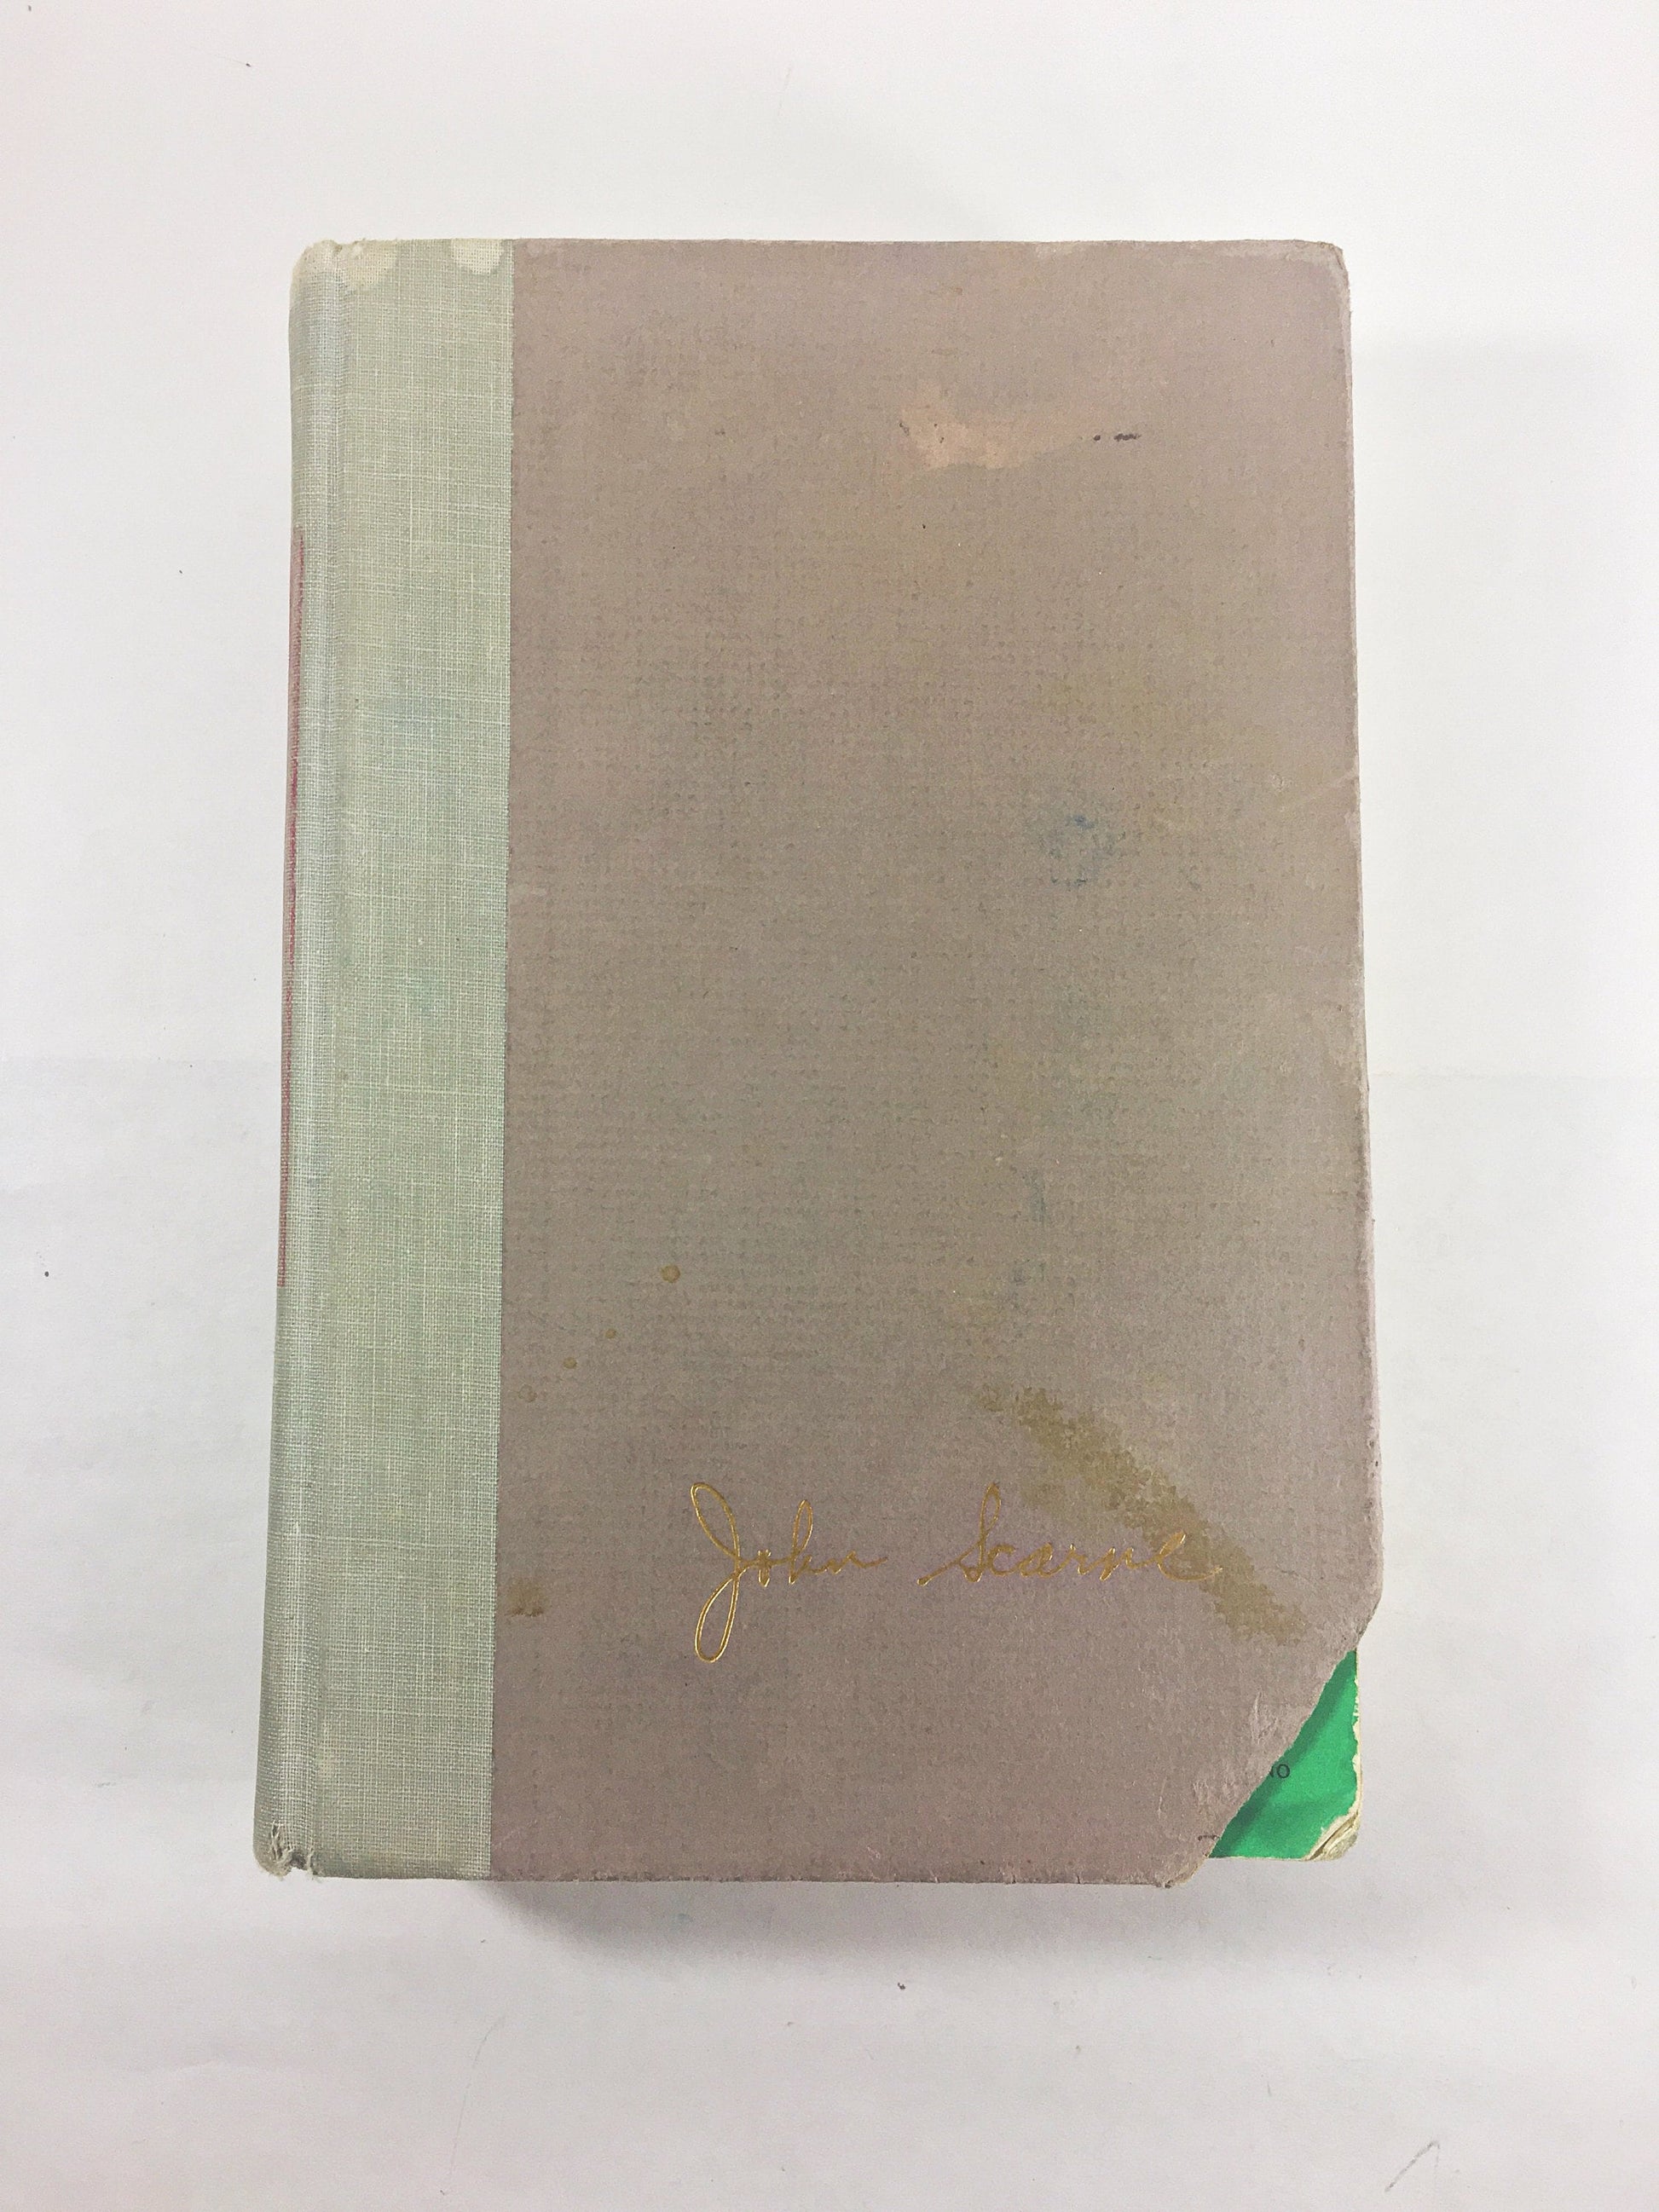 John Scarne's Complete Guide to Gambling FIRST EDITION vintage book circa 1961 by the foremost gambling expert. House percentages, strategy